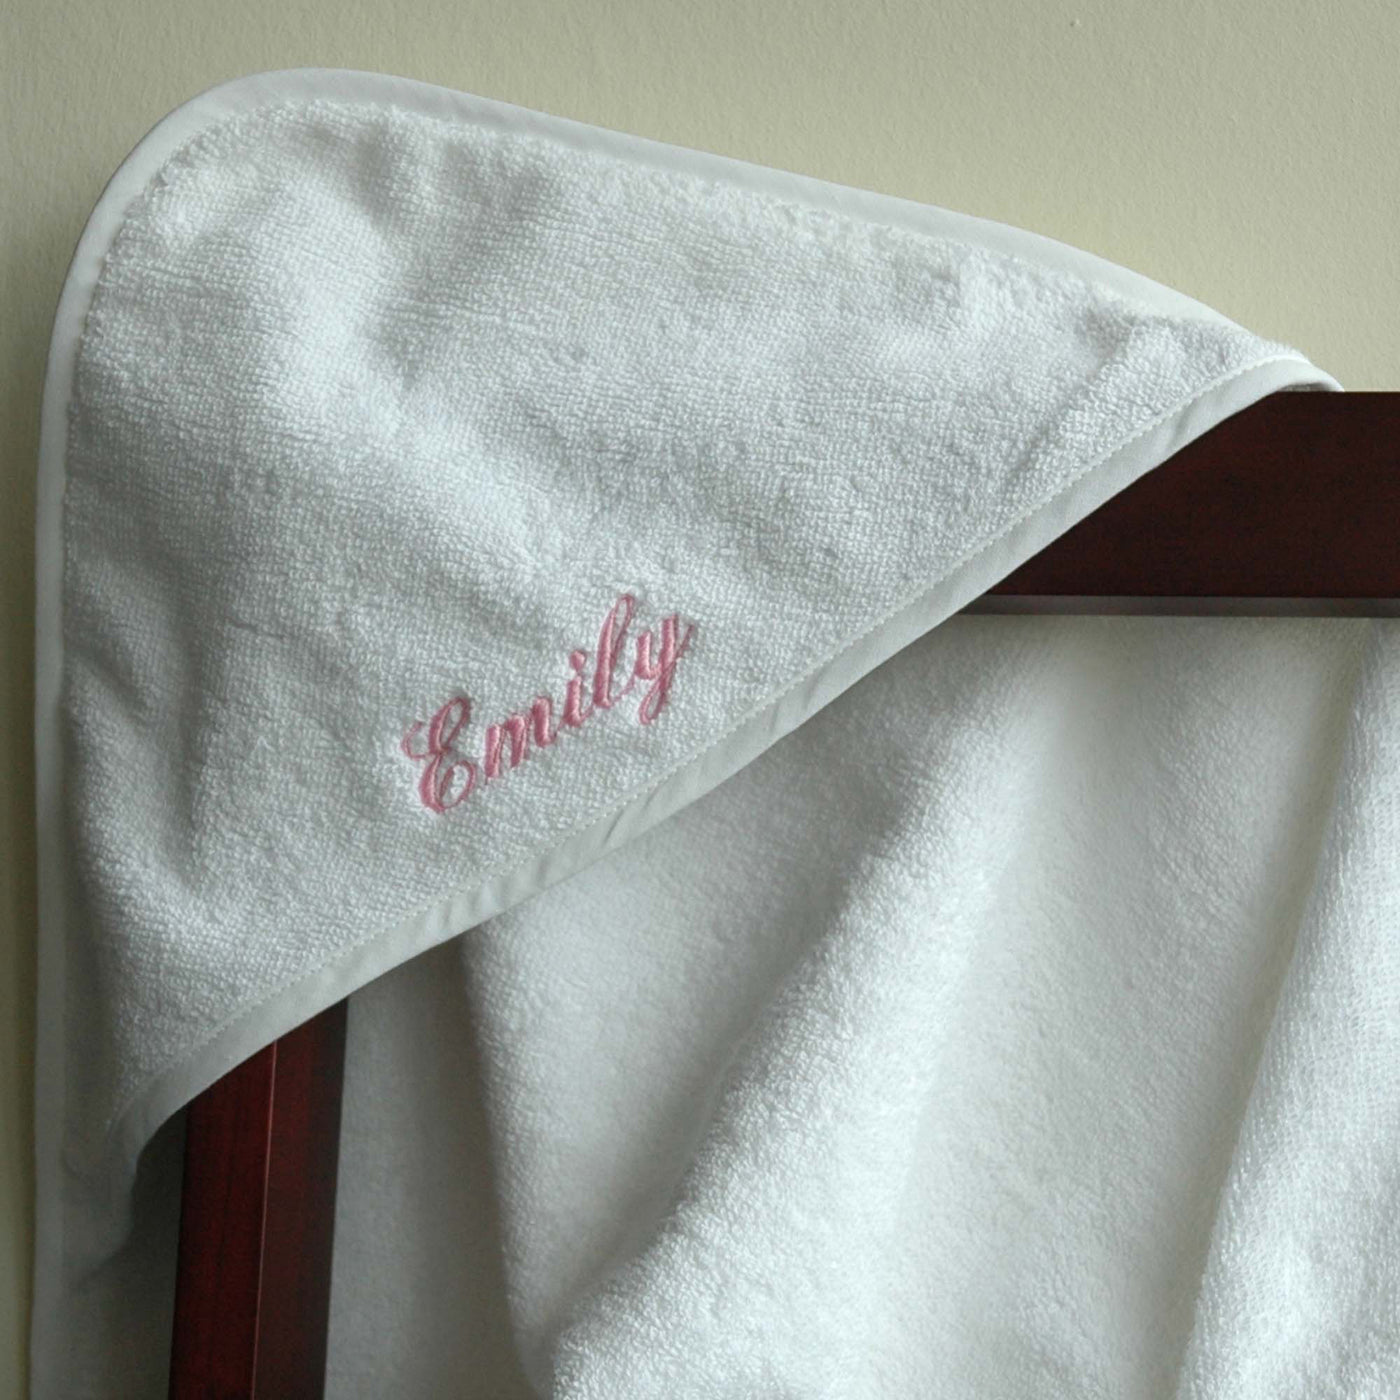 Personalised Monogrammed Milan Baby Towel Collection